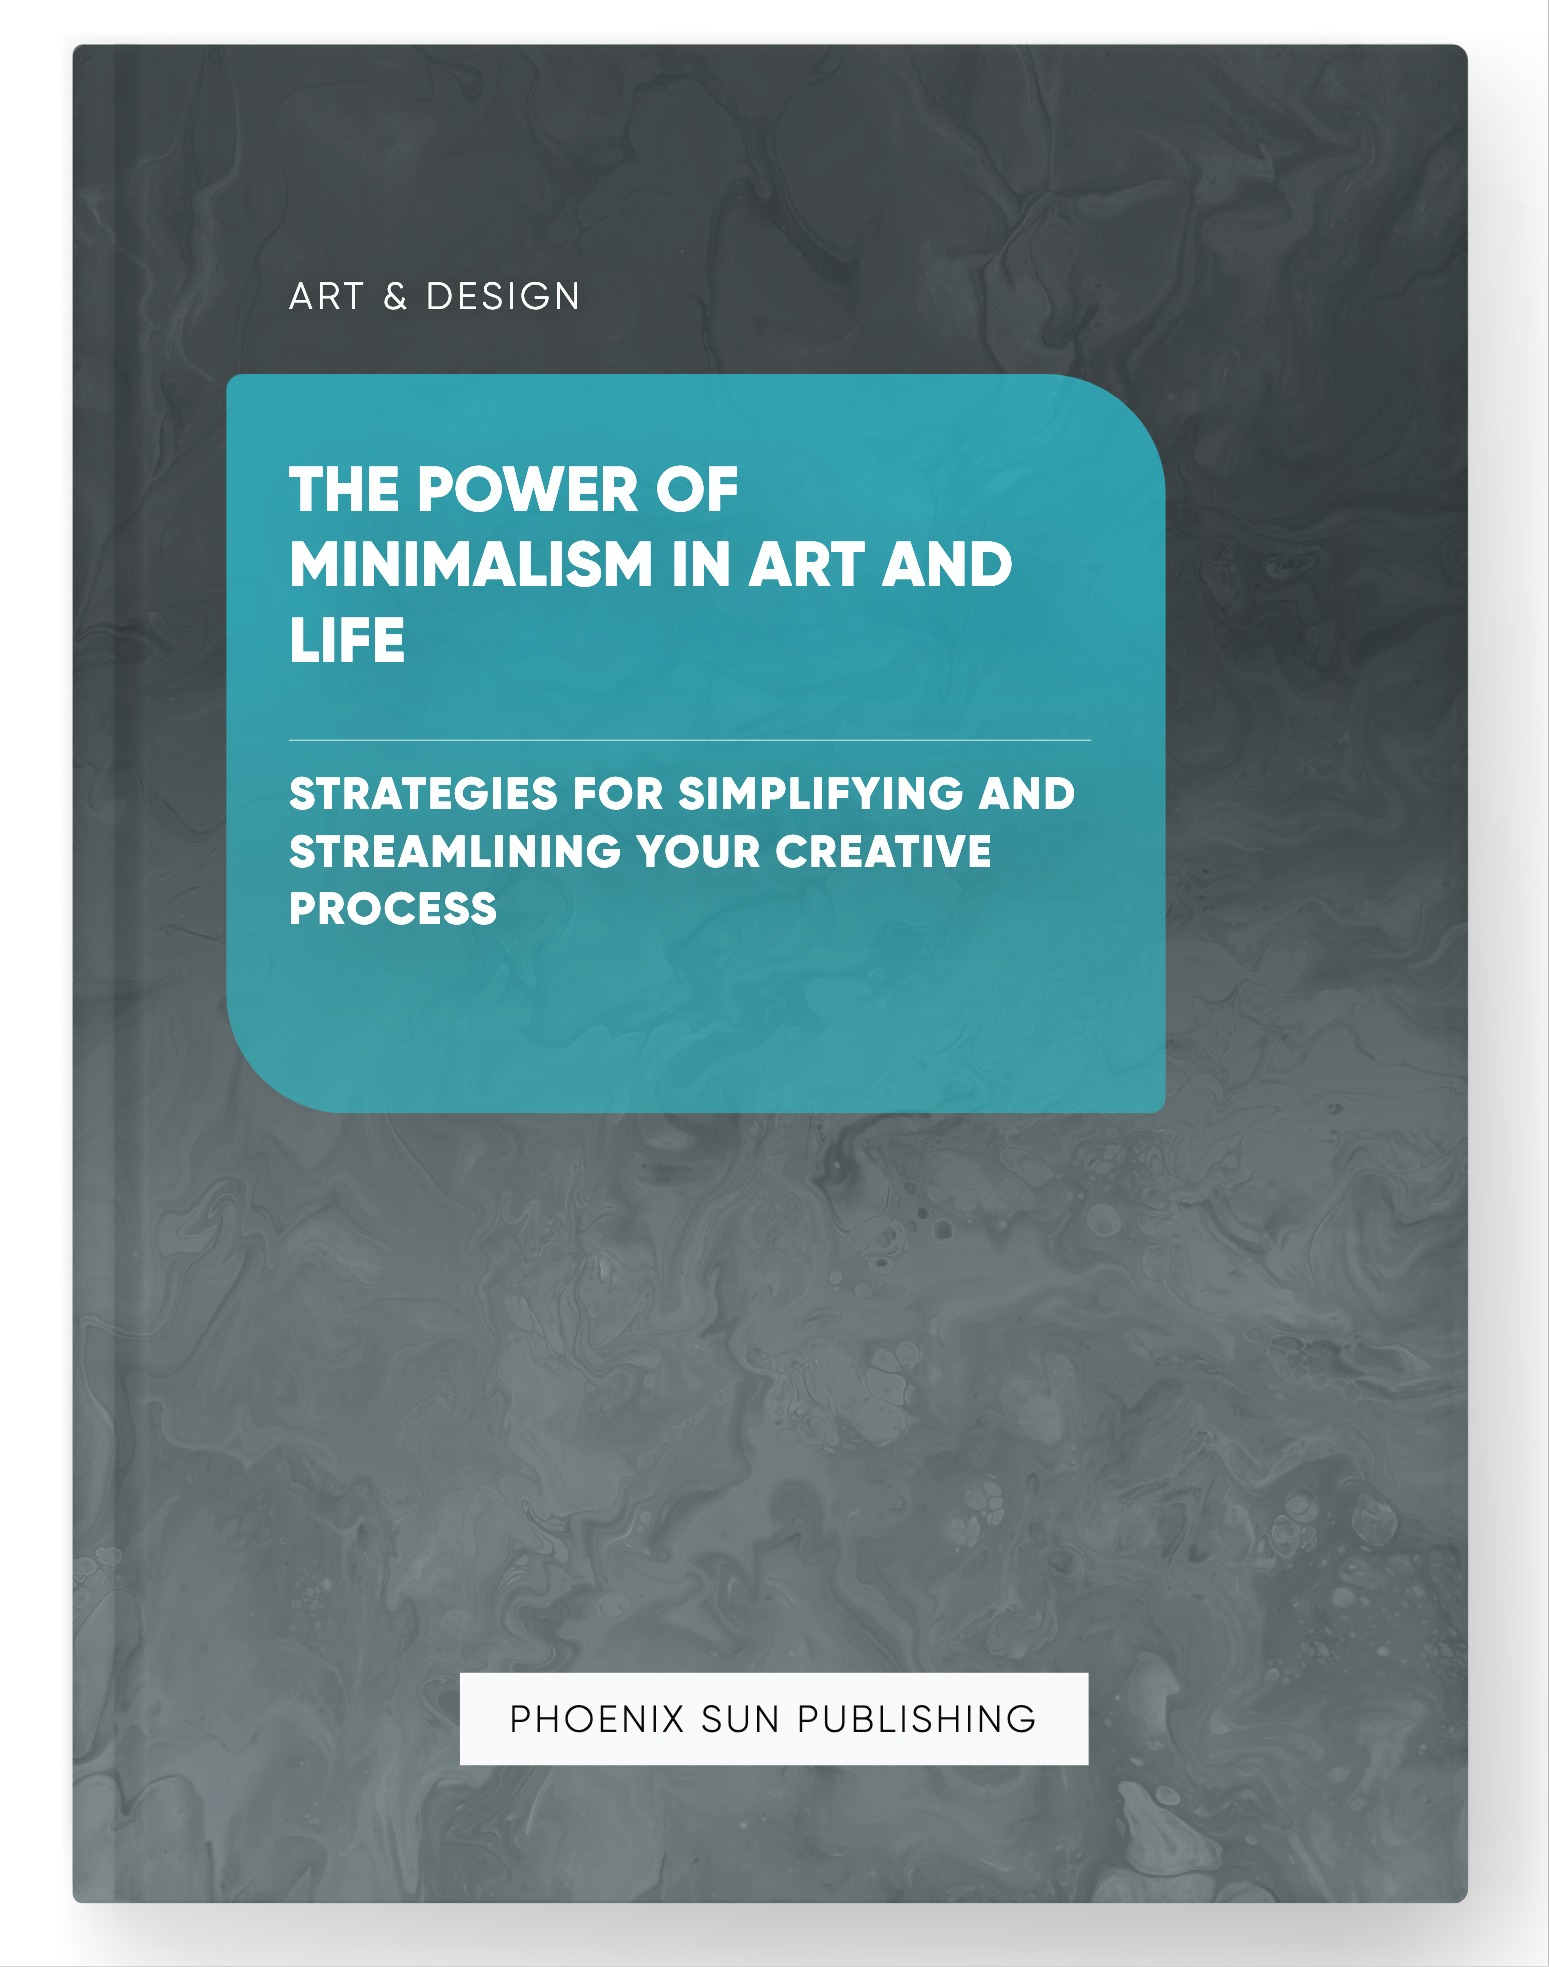 The Power of Minimalism in Art and Life – Strategies for Simplifying and Streamlining Your Creative Process